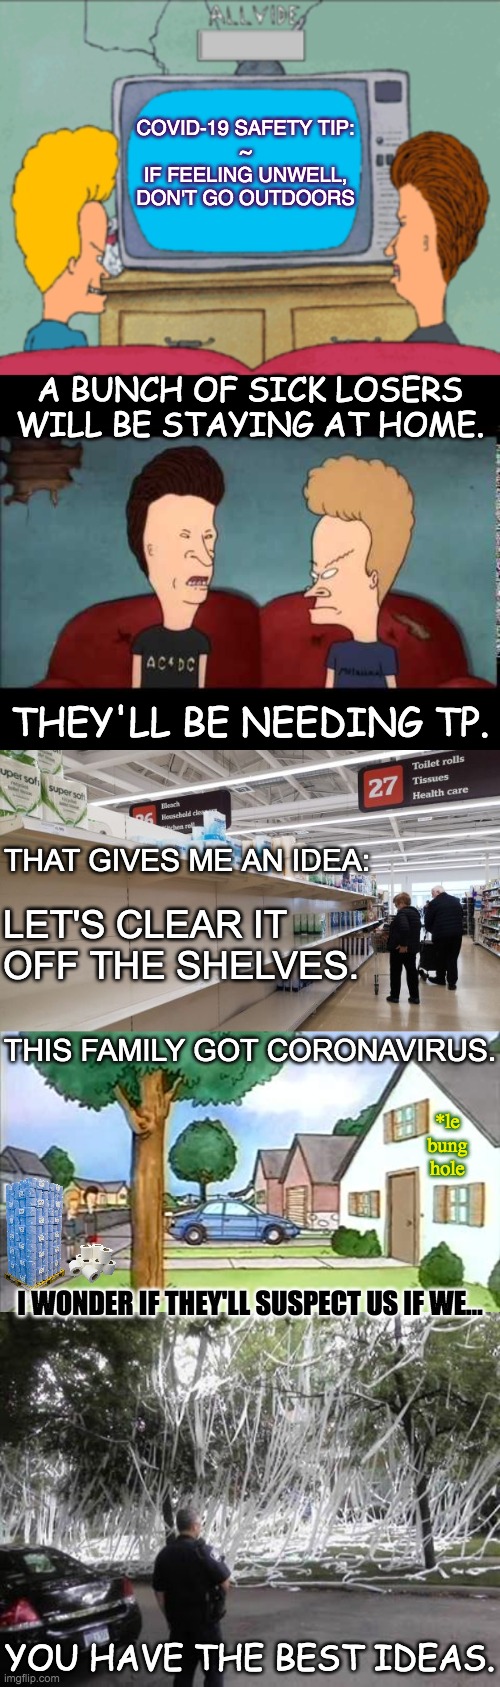 COVID-19 SAFETY TIP:
~
IF FEELING UNWELL,
DON'T GO OUTDOORS; A BUNCH OF SICK LOSERS WILL BE STAYING AT HOME. THEY'LL BE NEEDING TP. THAT GIVES ME AN IDEA:; LET'S CLEAR IT
OFF THE SHELVES. THIS FAMILY GOT CORONAVIRUS. *le bung hole; I WONDER IF THEY'LL SUSPECT US IF WE…; YOU HAVE THE BEST IDEAS. | image tagged in beavis and butthead,covid-19,coronavirus,toilet paper,no more toilet paper | made w/ Imgflip meme maker